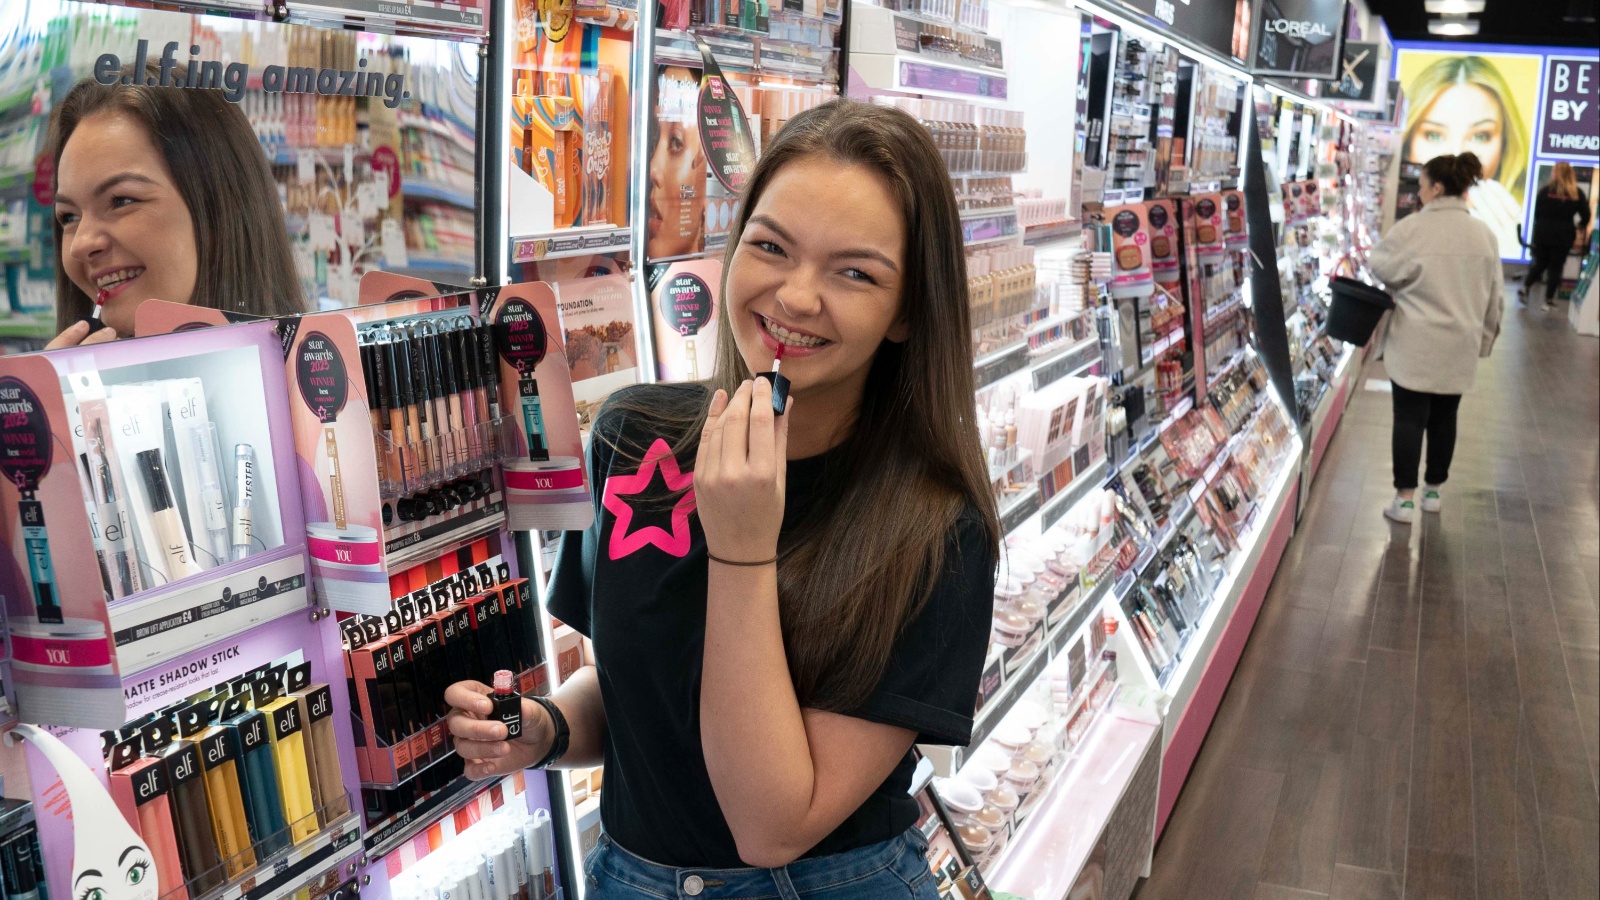 Superdrug staff member, Heather Anderson, 21, at the new Superdrug store in Braehead.